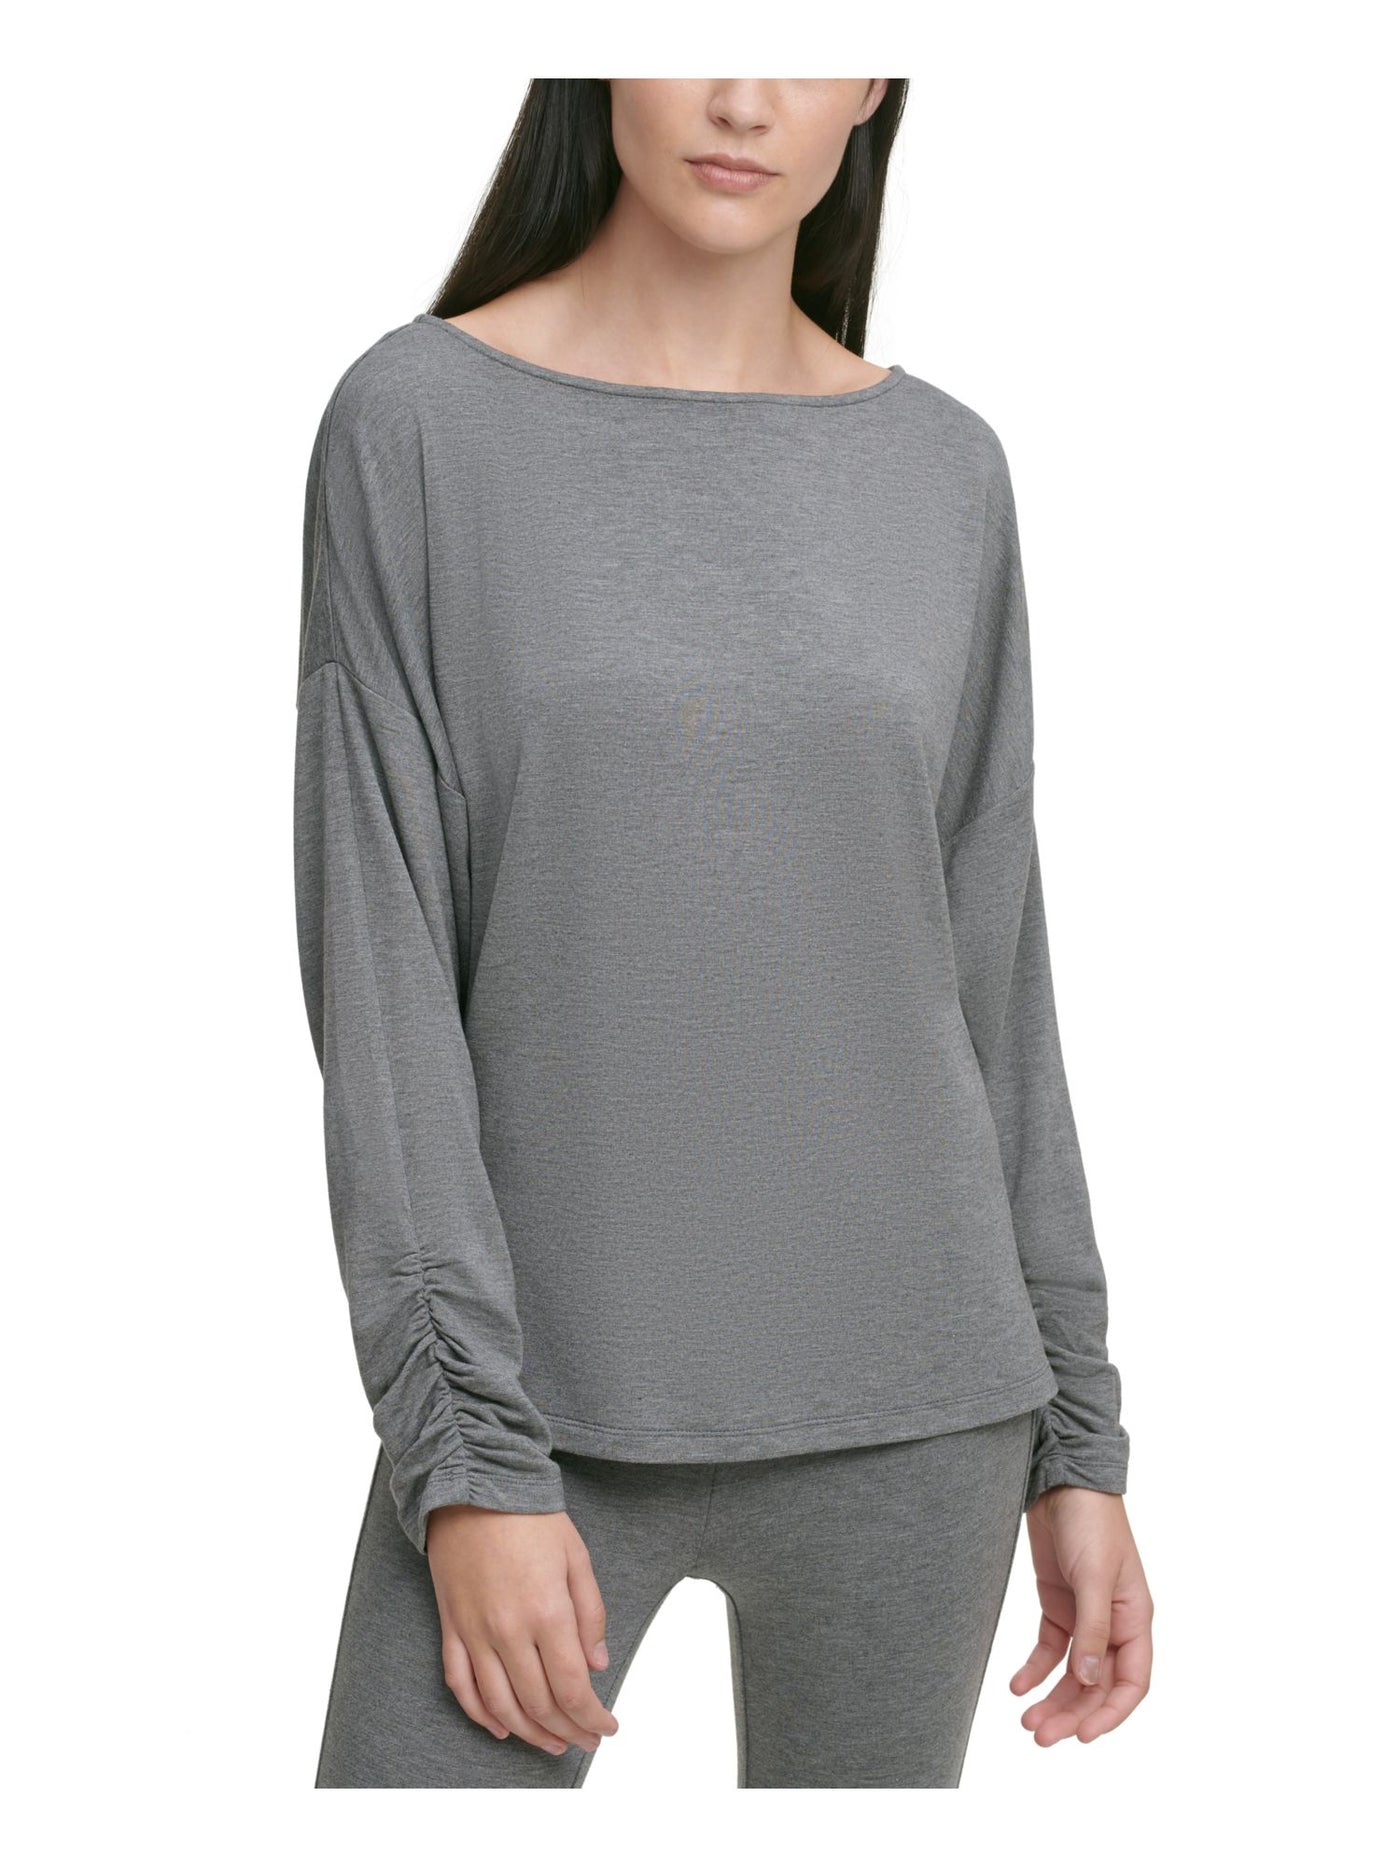 DKNY Womens Gray Ruched Long Sleeve Scoop Neck T-Shirt Size: XXS